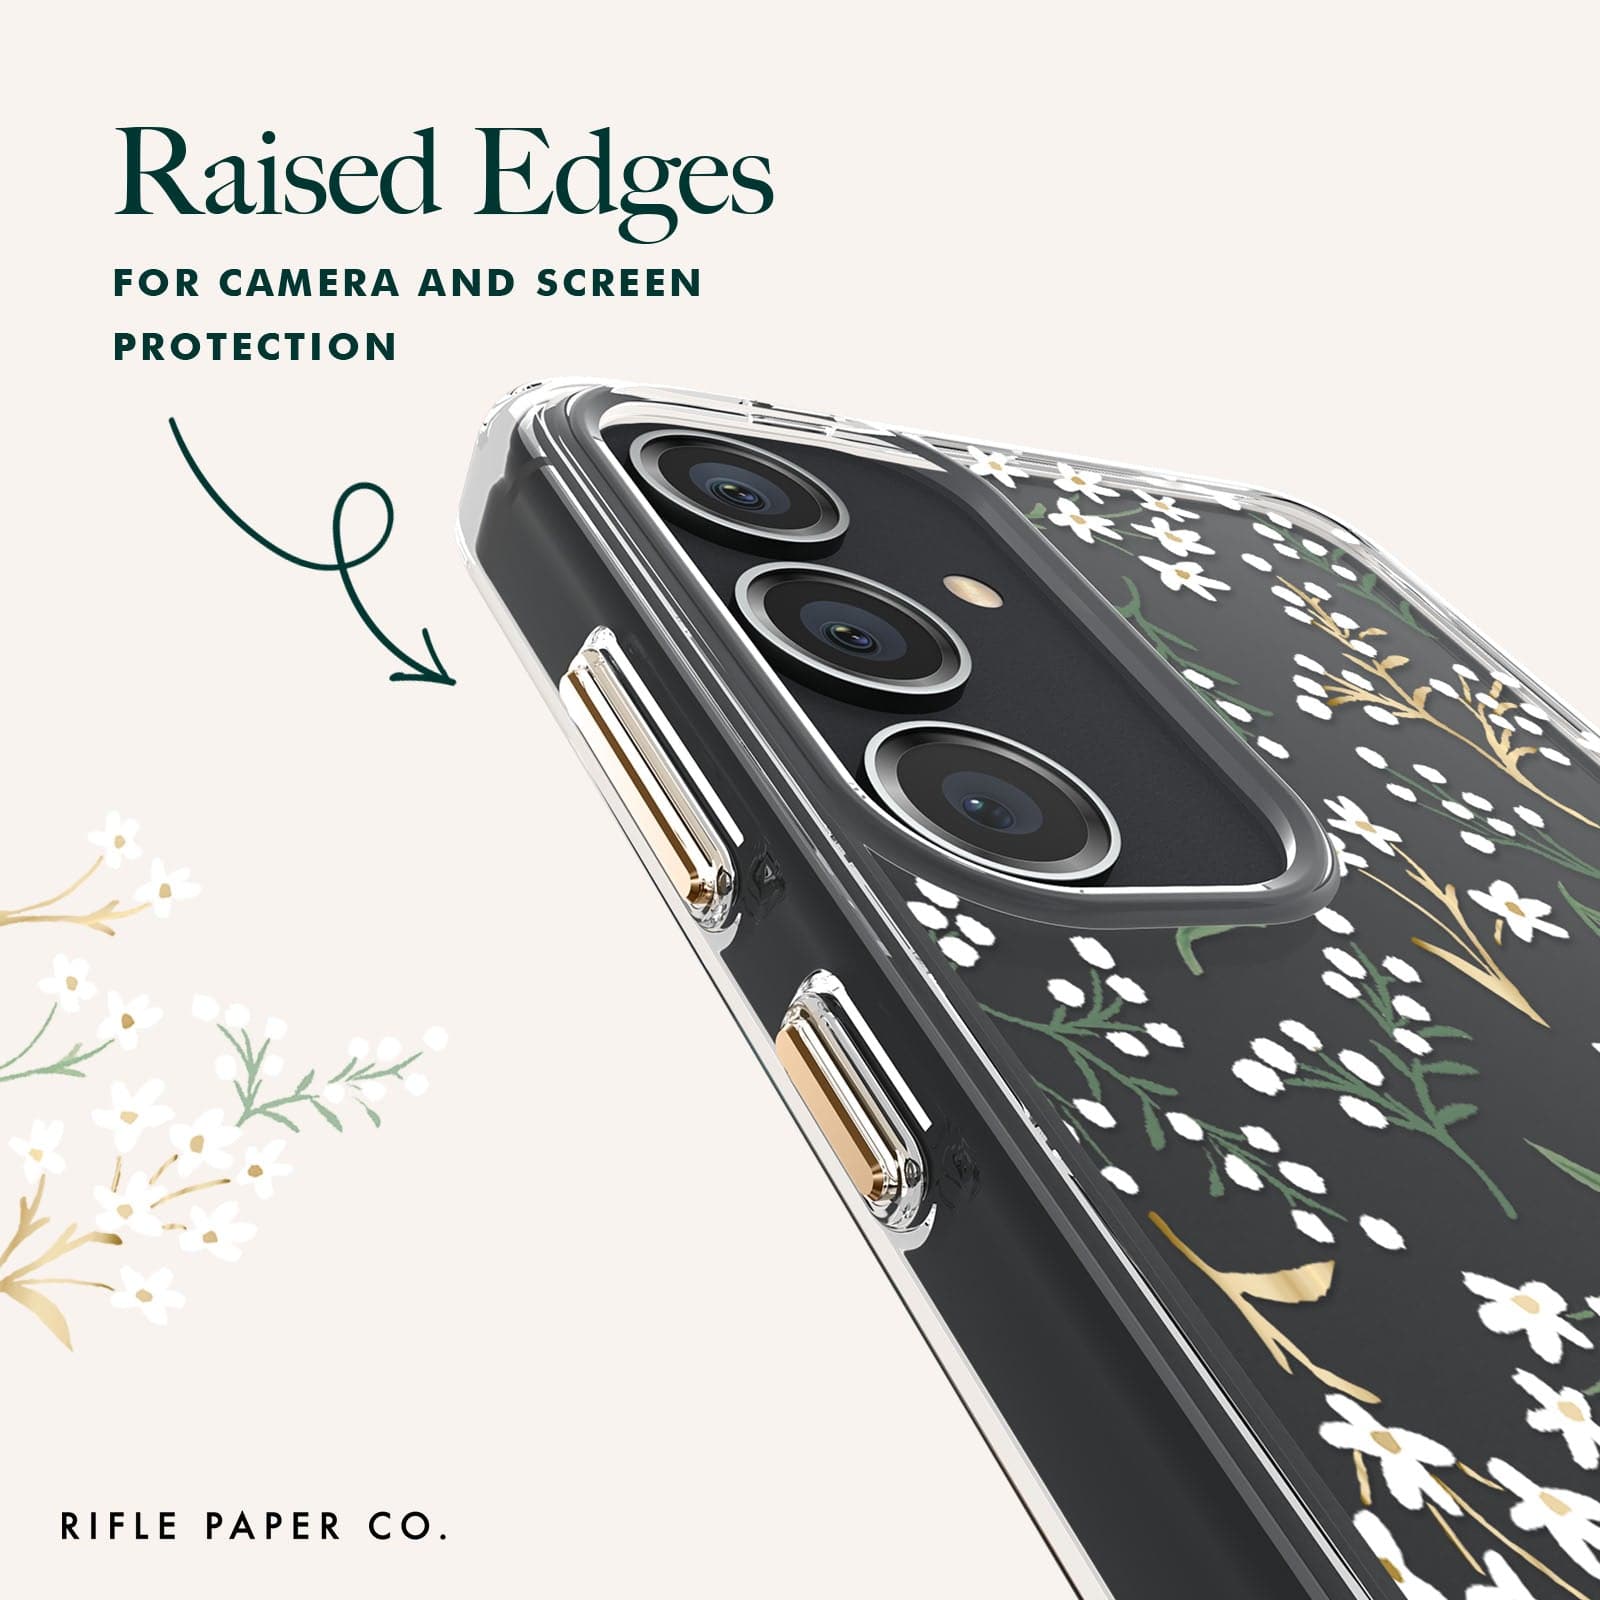 RAISED EDGES FOR CAMERA AND SCREEN PROTECTION